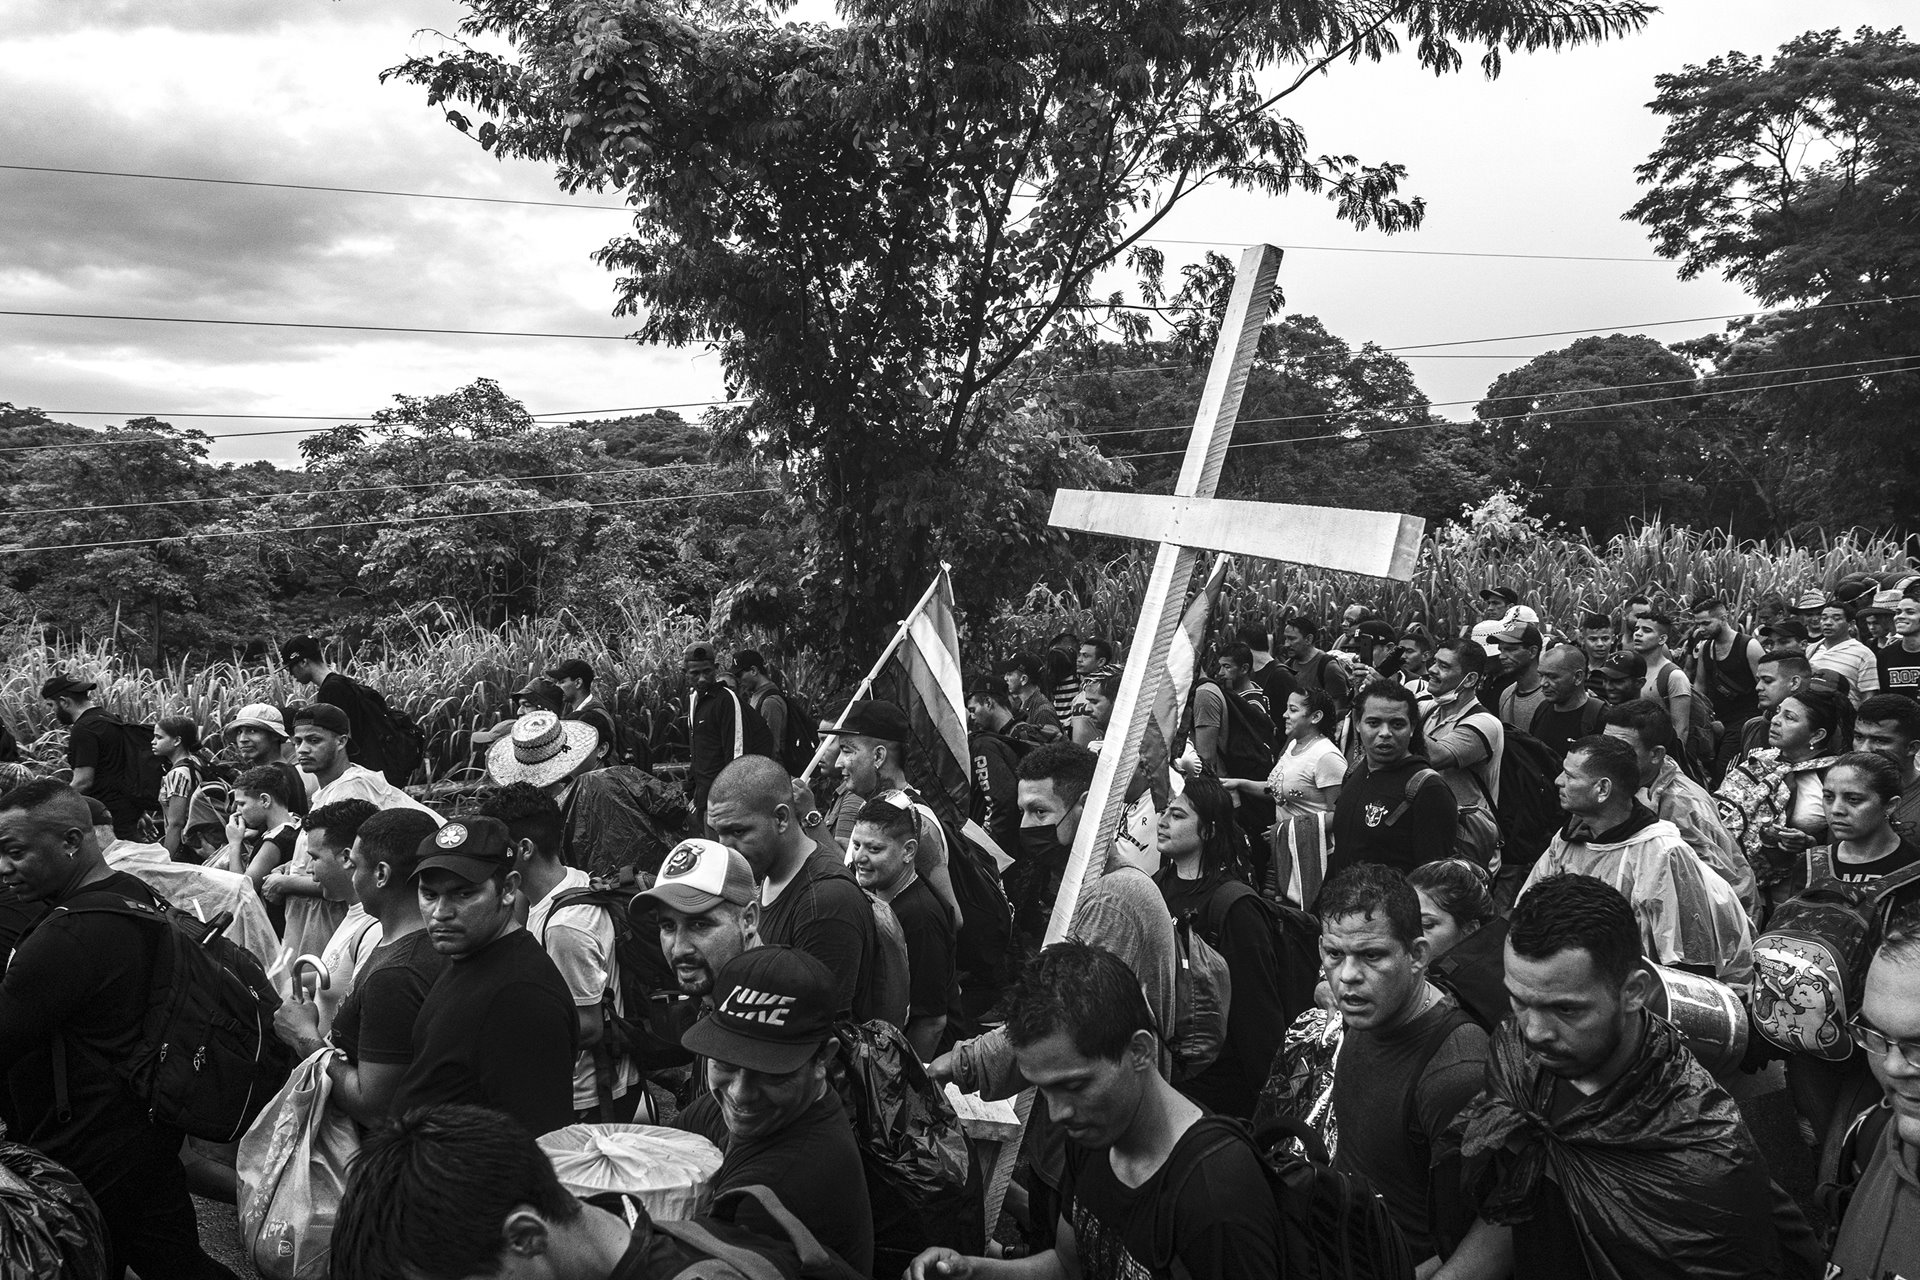 A migrant carries a cross alongside a caravan composed primarily of Venezuelans in Tapachula, Mexico. Tapachula, near the border with Guatemala, serves as a compulsory stop for migrants and asylum seekers because one of the offices of the Mexican Commission for Aid to Refugees (COMAR) is located in the city. Local NGOs accuse COMAR of corruption: selling humanitarian visas to those who can afford them and deliberately delaying visas to others to curb the influx of migrants toward the US-Mexico border.